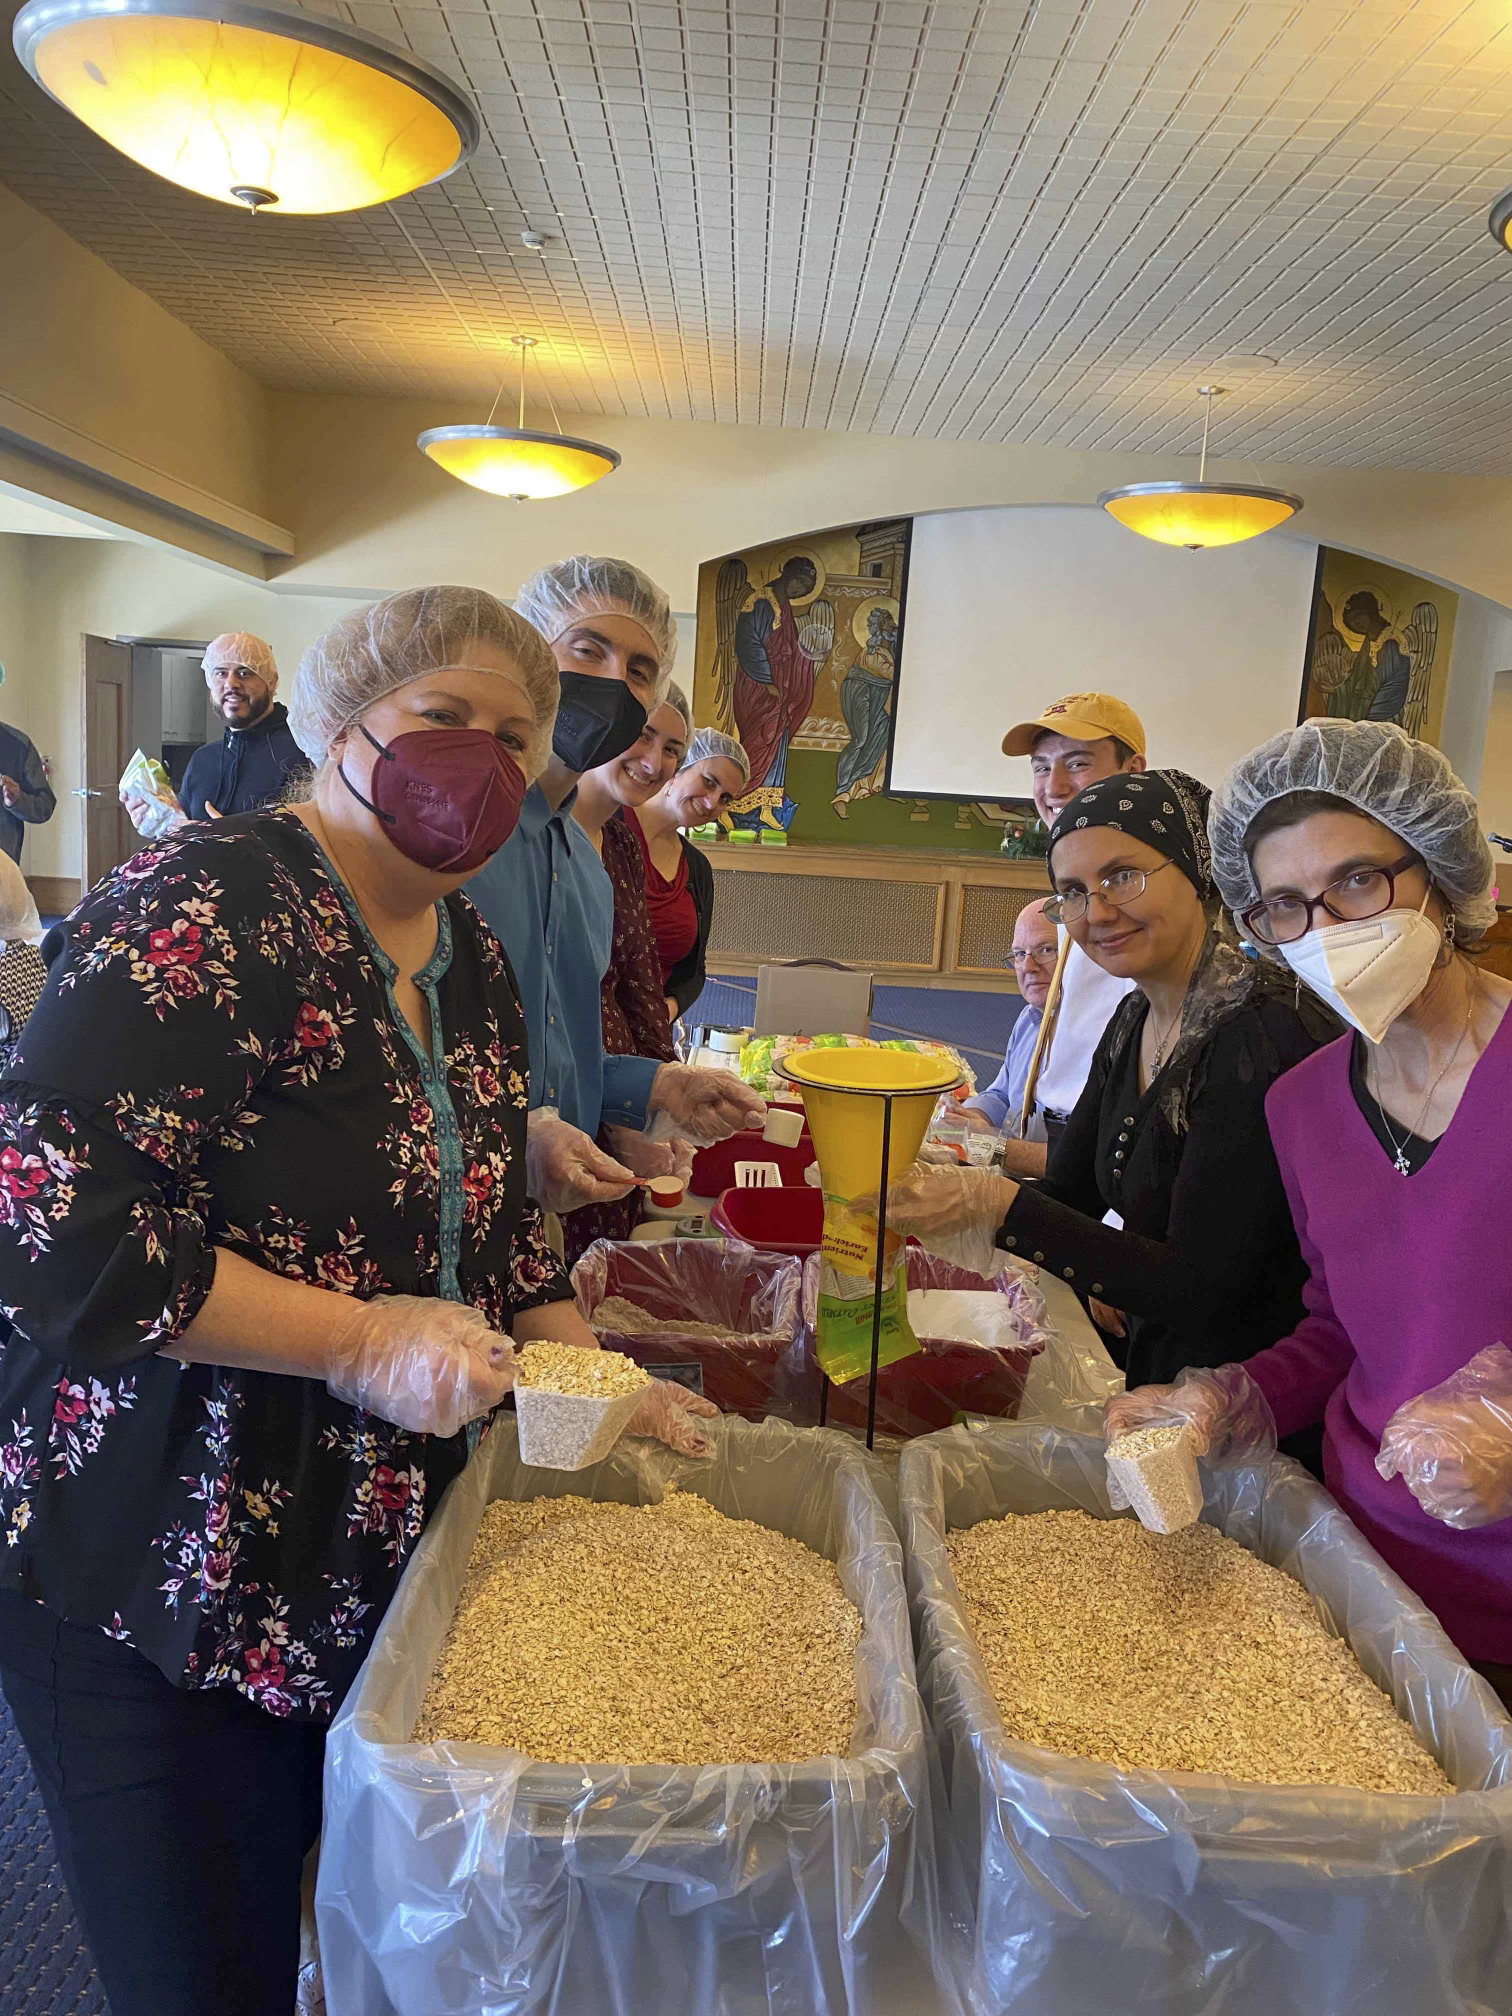 8 volunteers pictured around a table packing oatmeal.